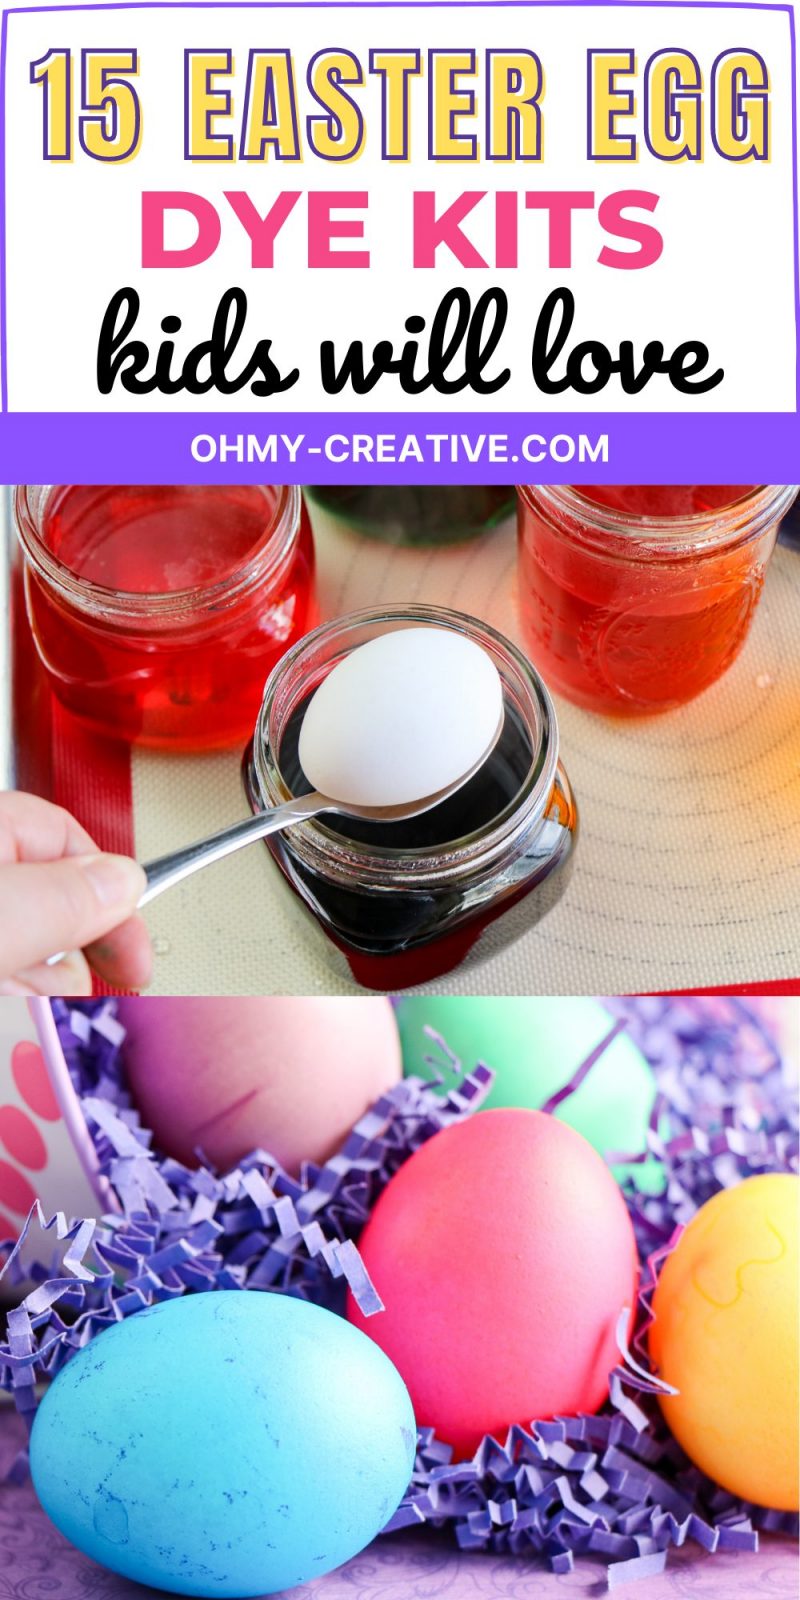 Easter Egg dye kits for kids. An egg is dipped into the liquid egg die and comes out in a bright color.